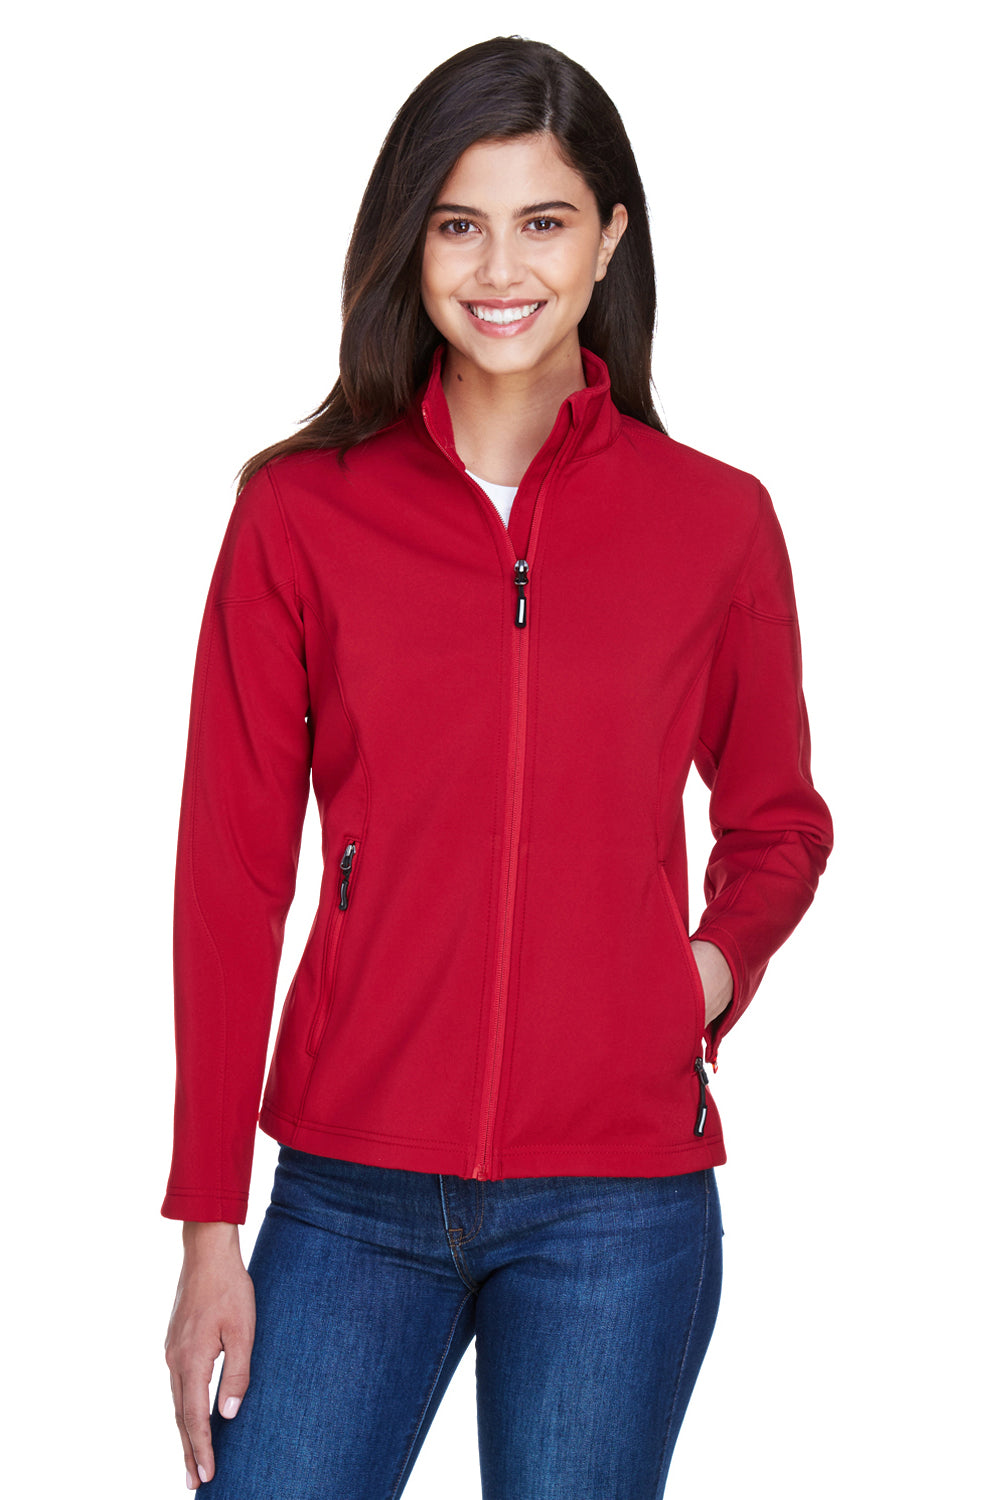 Core 365 78184 Womens Cruise Water Resistant Full Zip Jacket Red Front